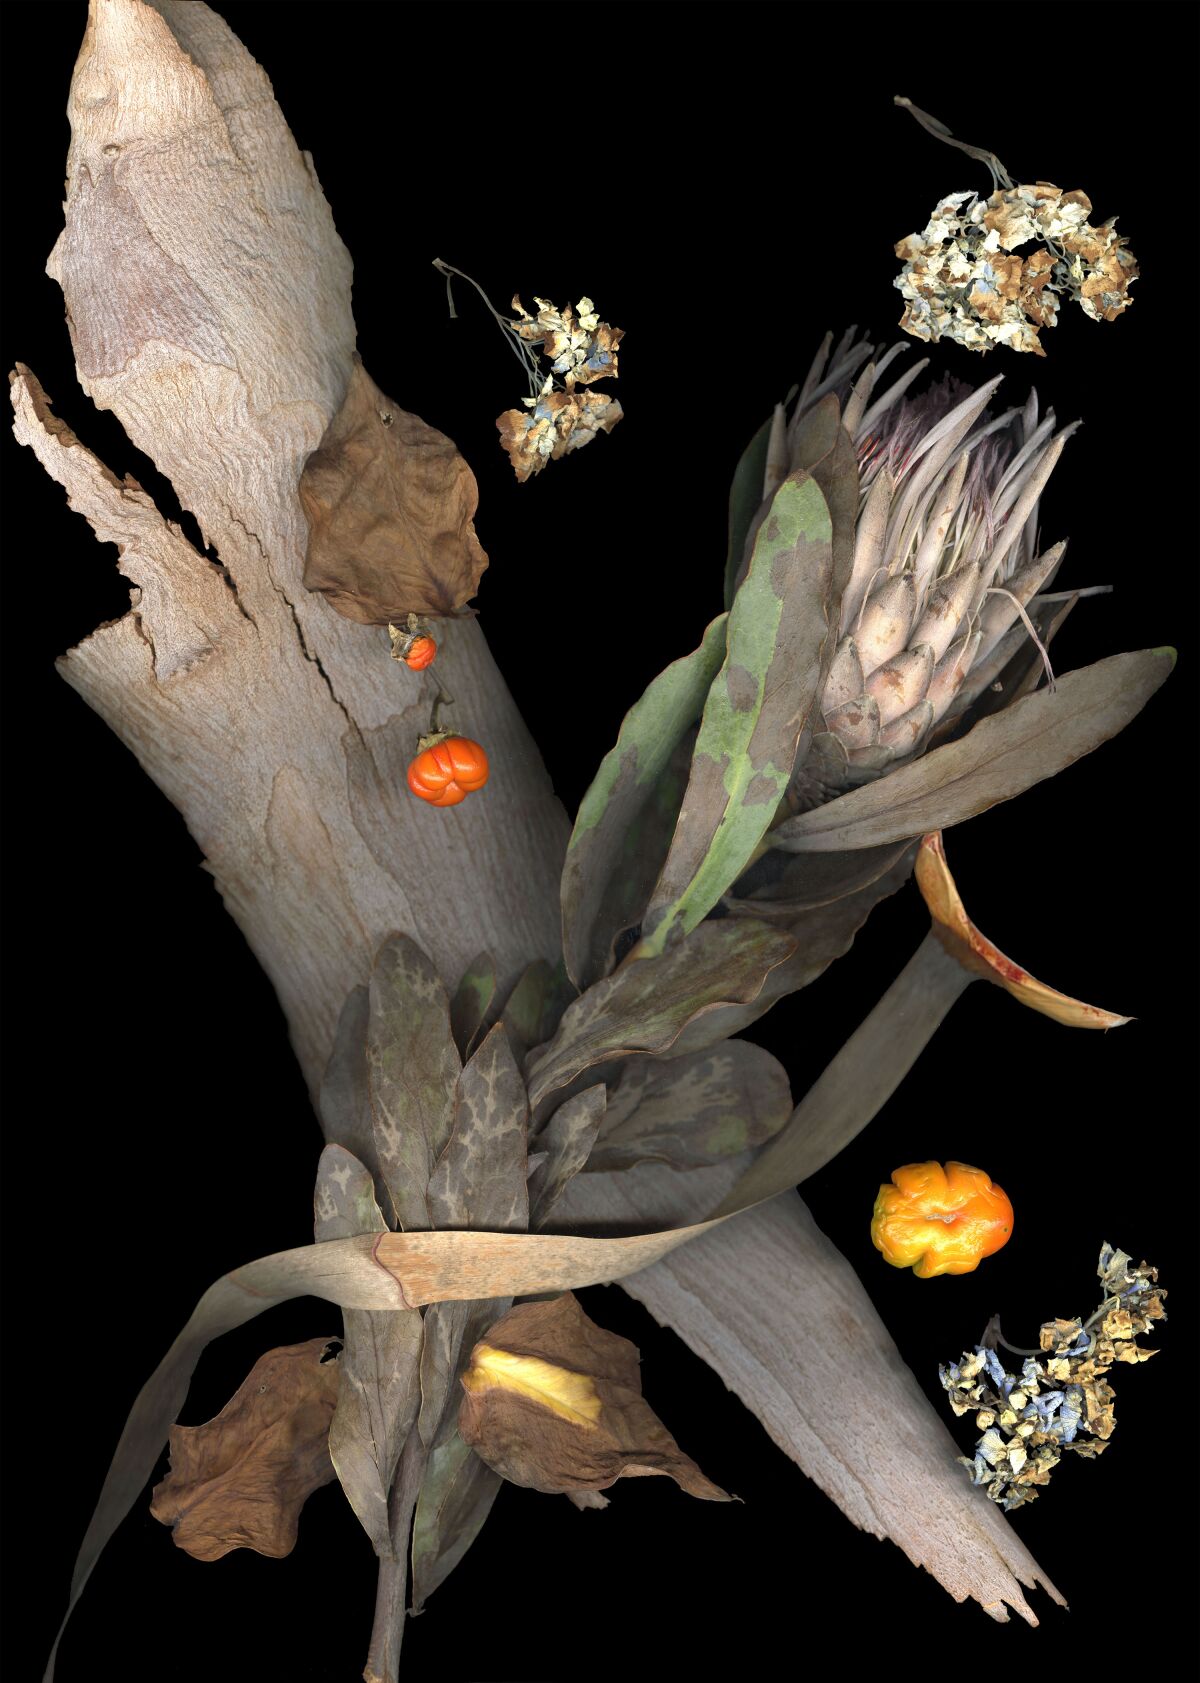 This untitled image is a part of Faiya Fredman's "Late Botanicals Series," which were featured in "The Steel Goddess: Works by Faiya Fredman, 1998-2018" at the Oceanside Museum of Art.